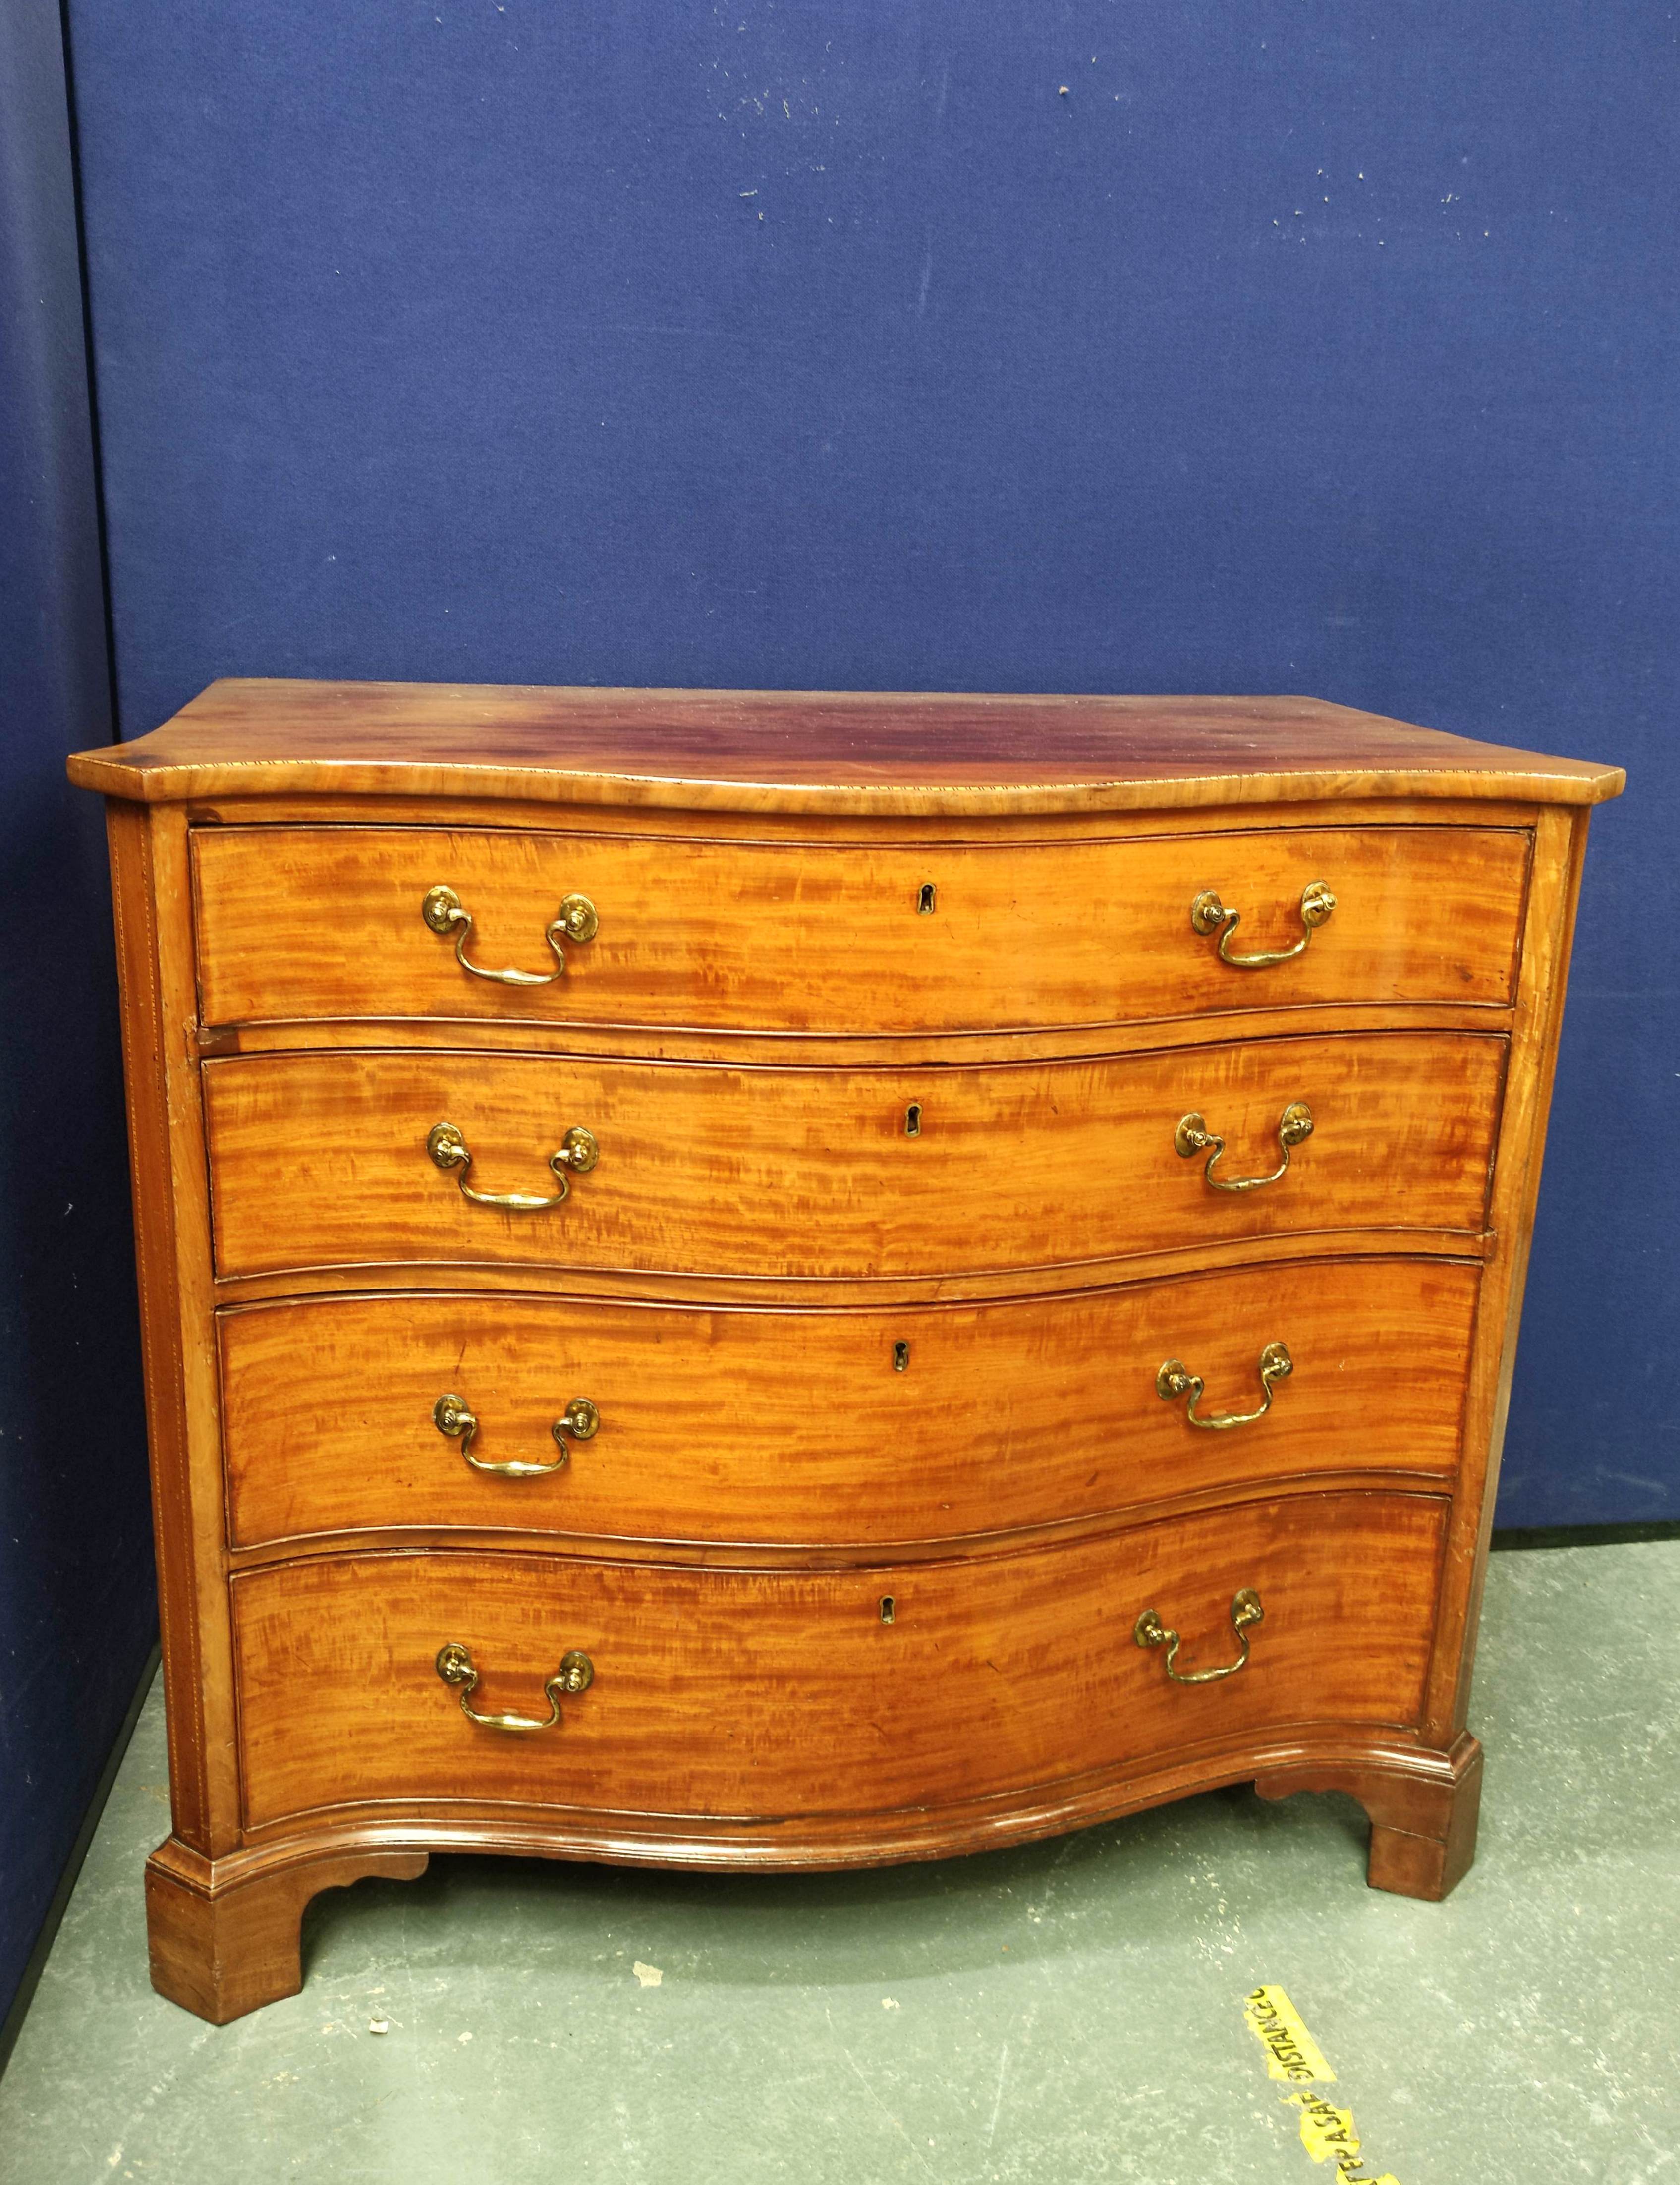 George III mahogany serpentine chest of drawers with four graduated drawers, decorated with